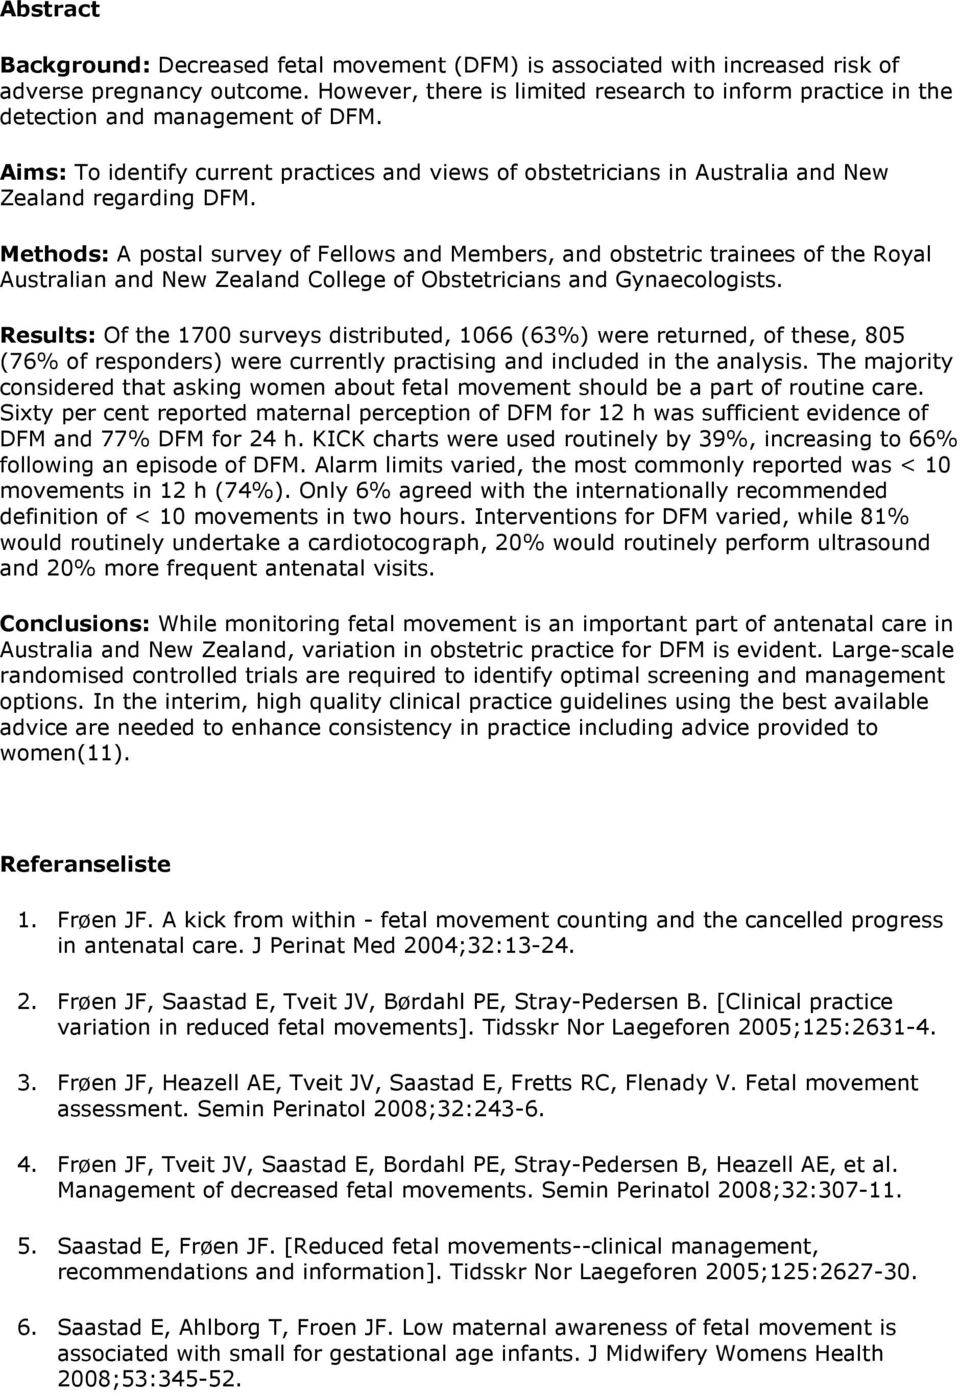 Methods: A postal survey of Fellows and Members, and obstetric trainees of the Royal Australian and New Zealand College of Obstetricians and Gynaecologists.